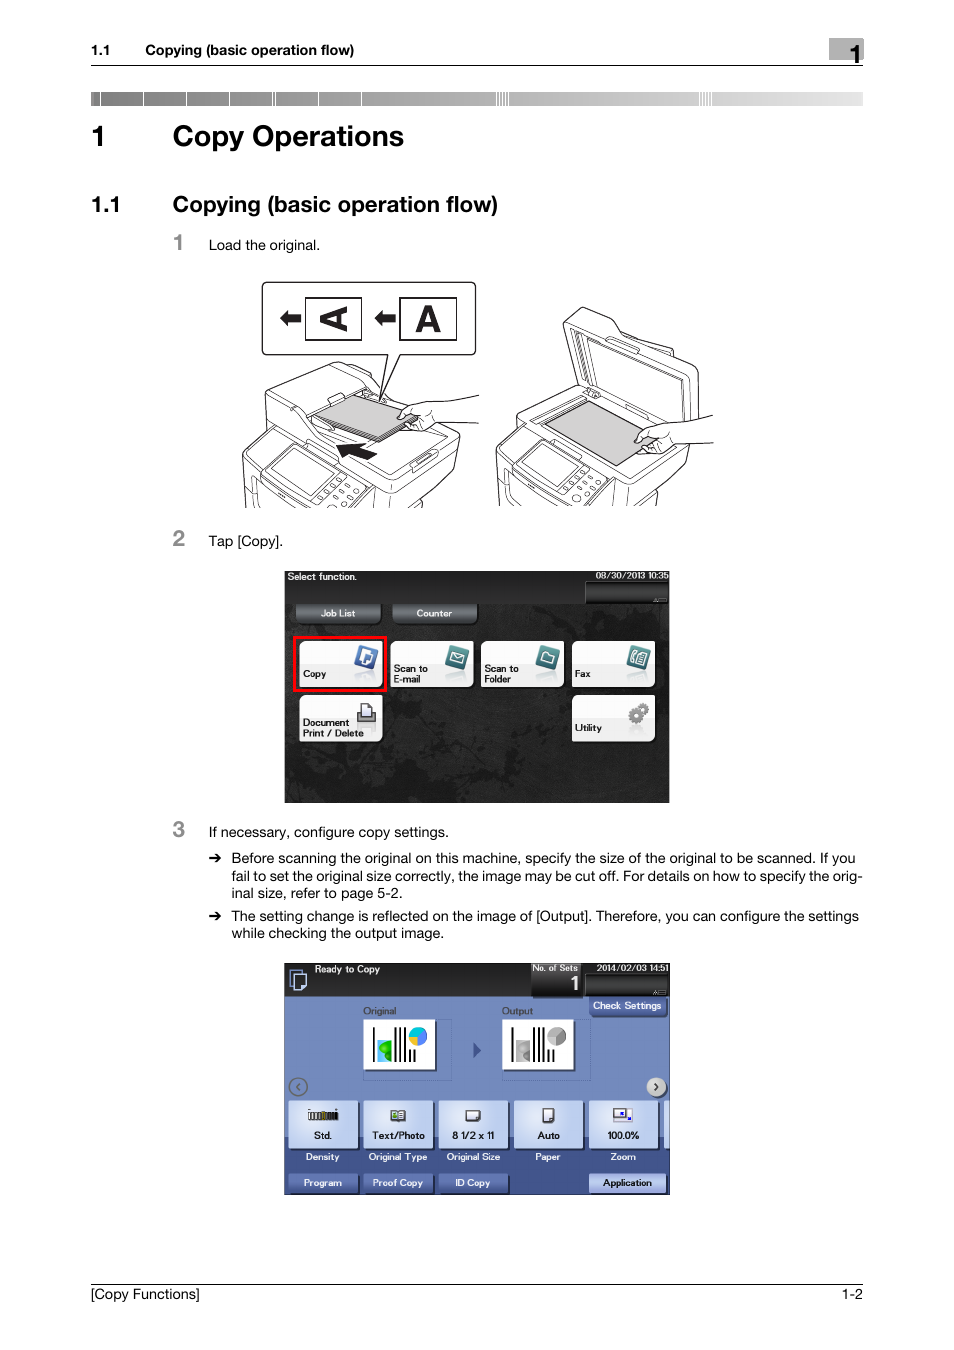 1 copy operations, 1 copying (basic operation flow), Copy operations | Copying (basic operation flow) -2, 1copy operations, 1 copying (basic operation flow) 1 | Konica Minolta bizhub 4750 User Manual | Page 4 / 30